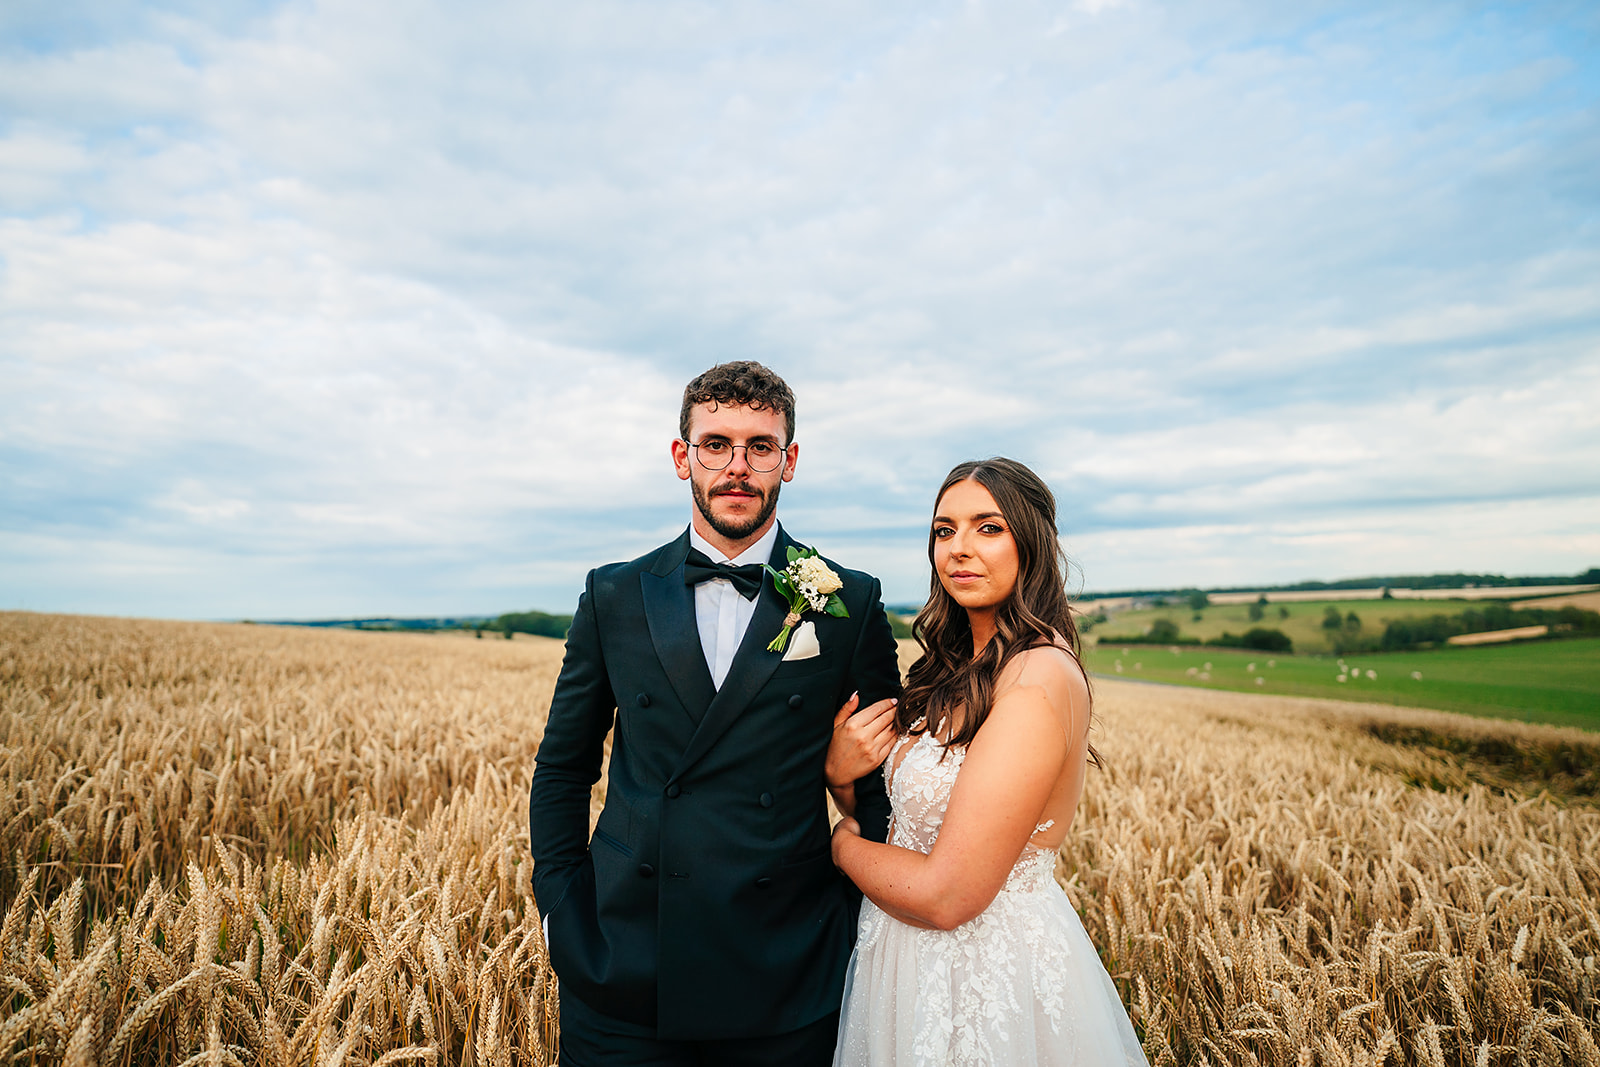 A bride and groom standing in the Kingcote Barn, surrounded by a wheat field.